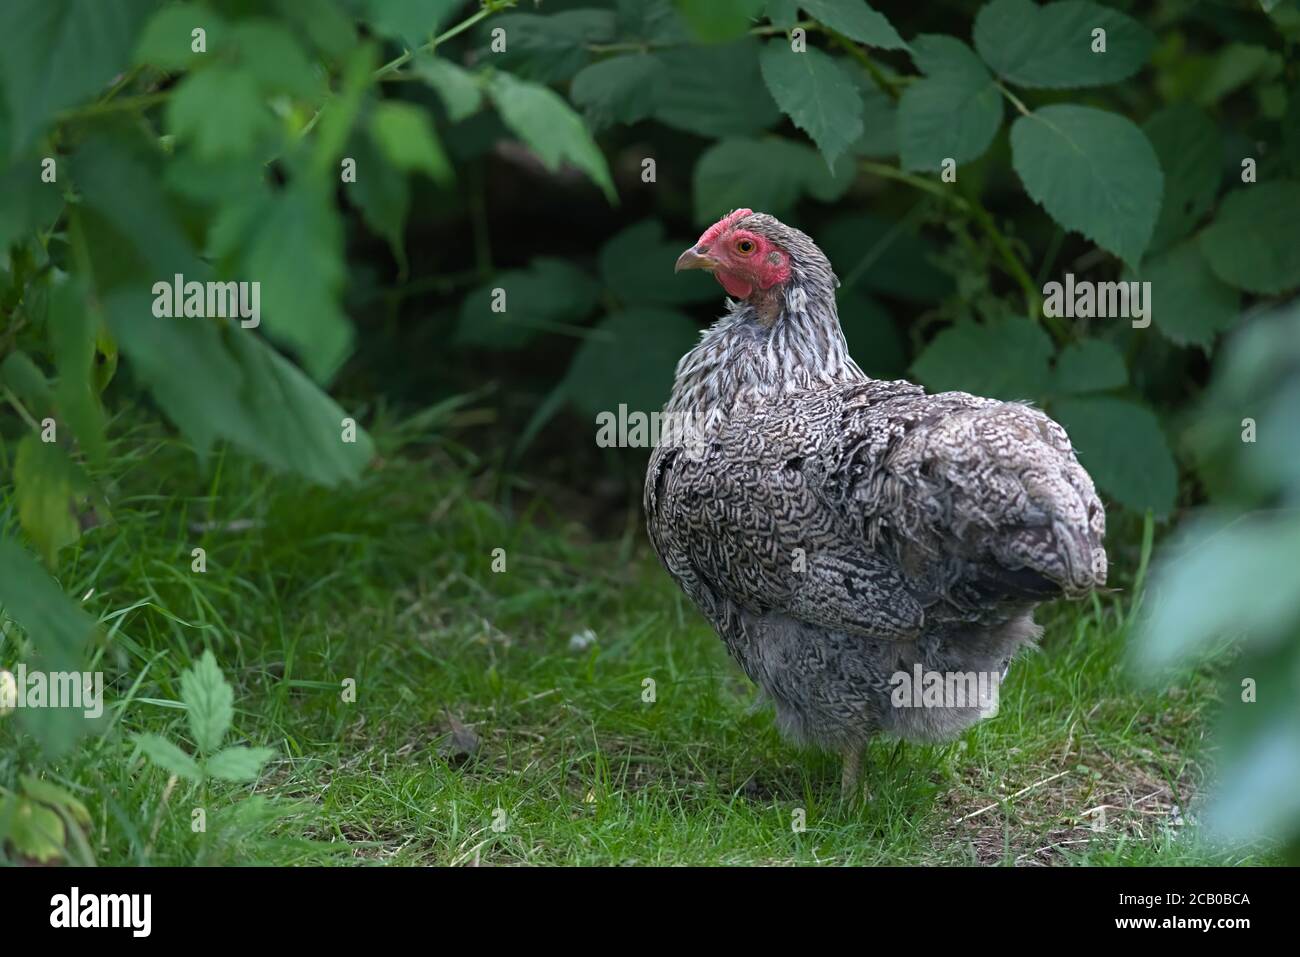 1 - Facing side on, intricate silver and black detailed patterning of this pet bantam chicken's plumage is shown. Pure bred animal in garden scene. Stock Photo